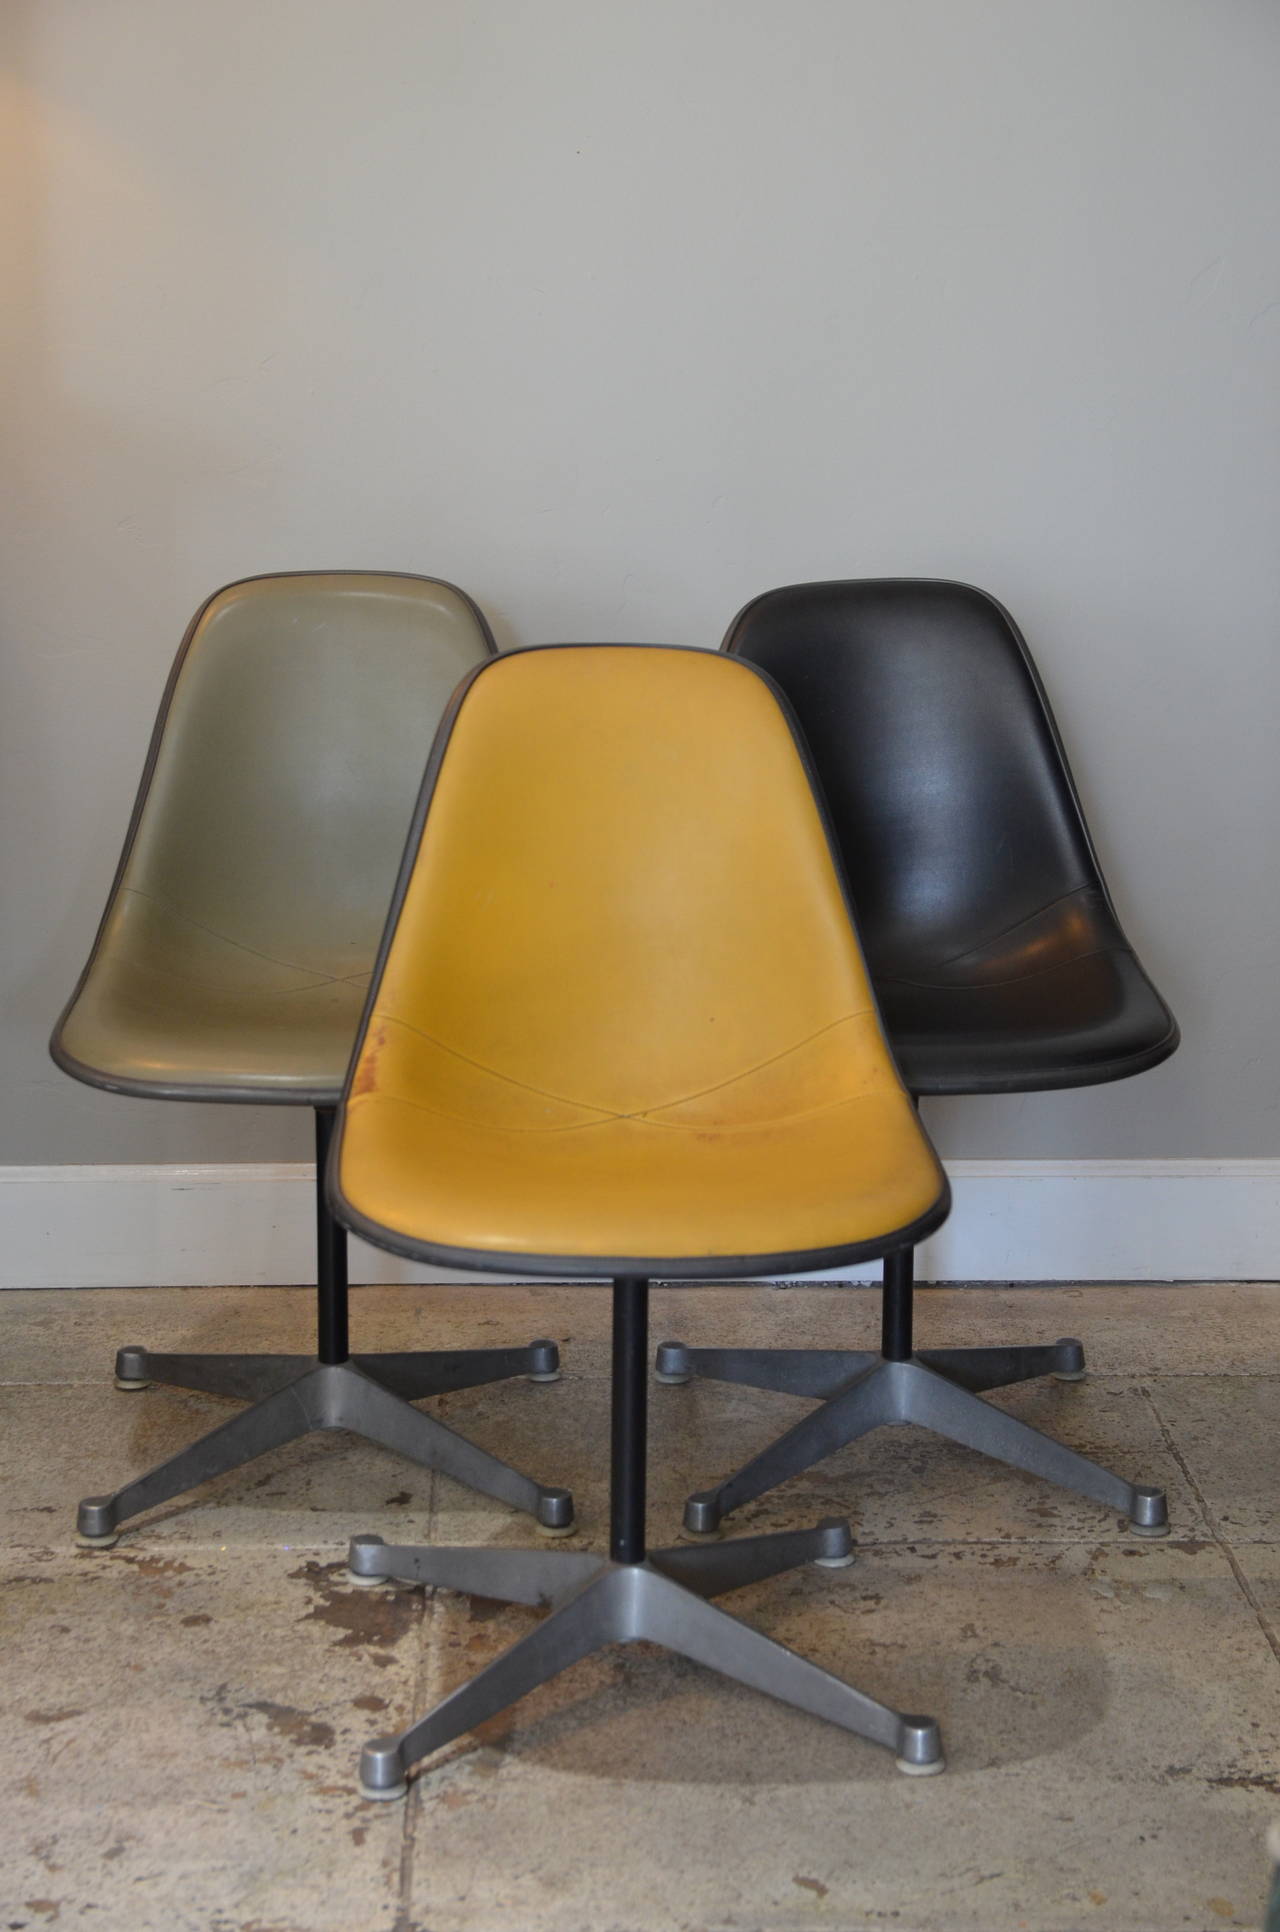 Set of 3 Vintage Swiveling Chairs by Eames for Herman Miller. One black, one gray and one dark yellow.